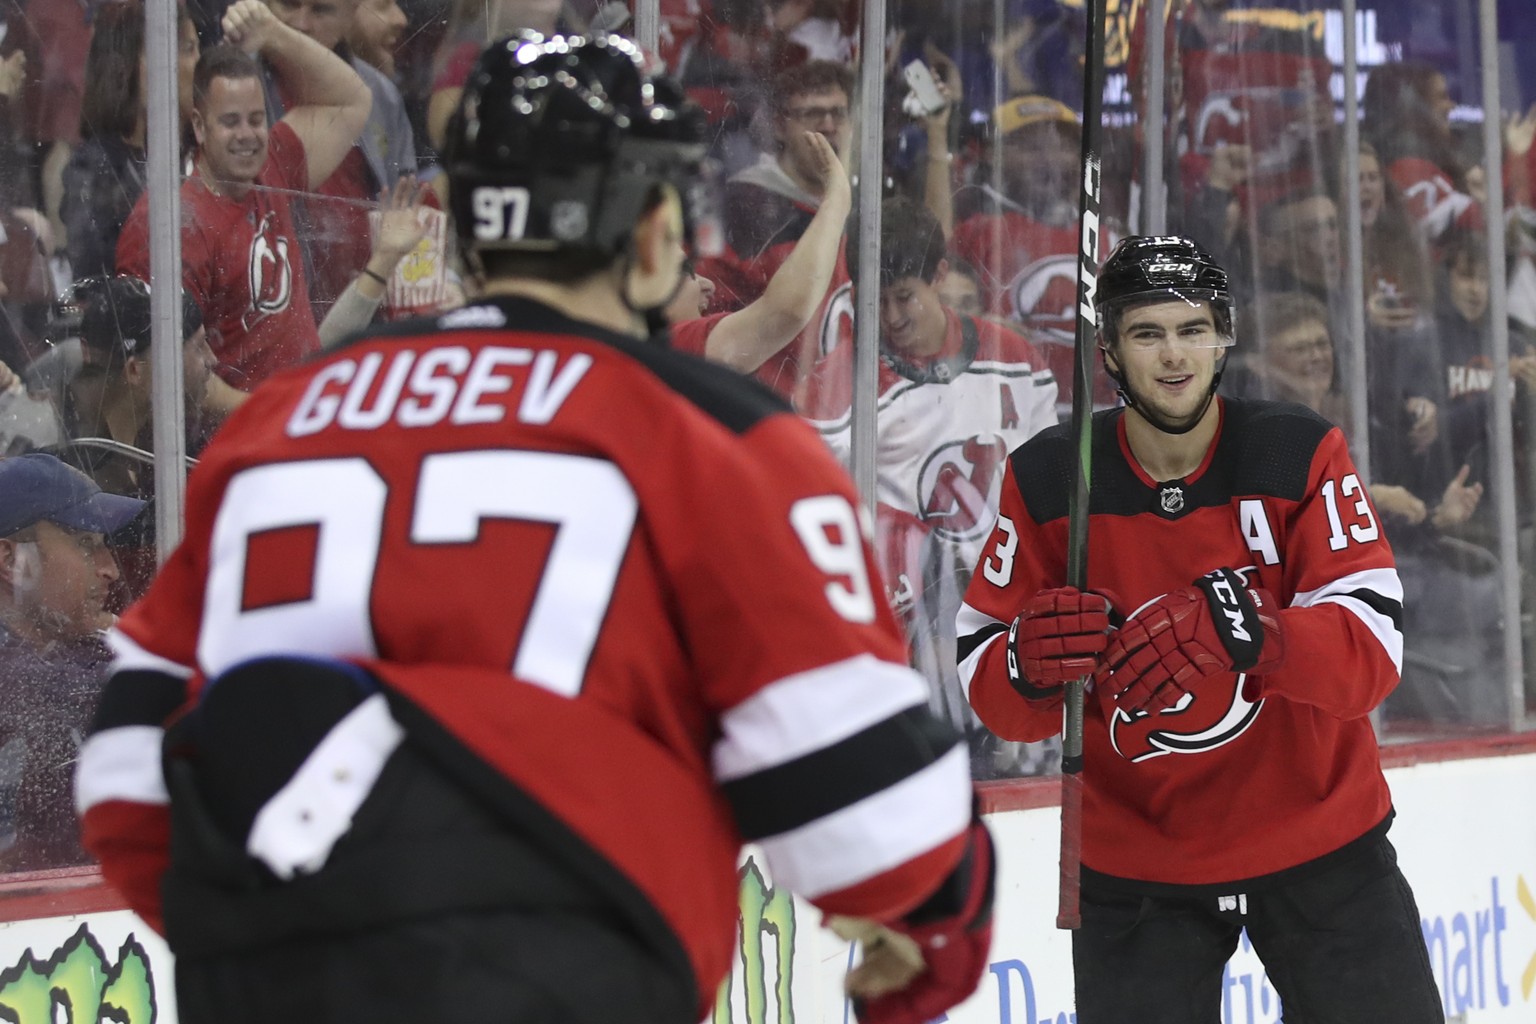 New Jersey Devils left wing Nikita Gusev (97) celebrates after scoring a goal with center Nico Hischier (13) during the second period of a preseason NHL hockey game, Saturday, Sept. 21, 2019, in Newar ...